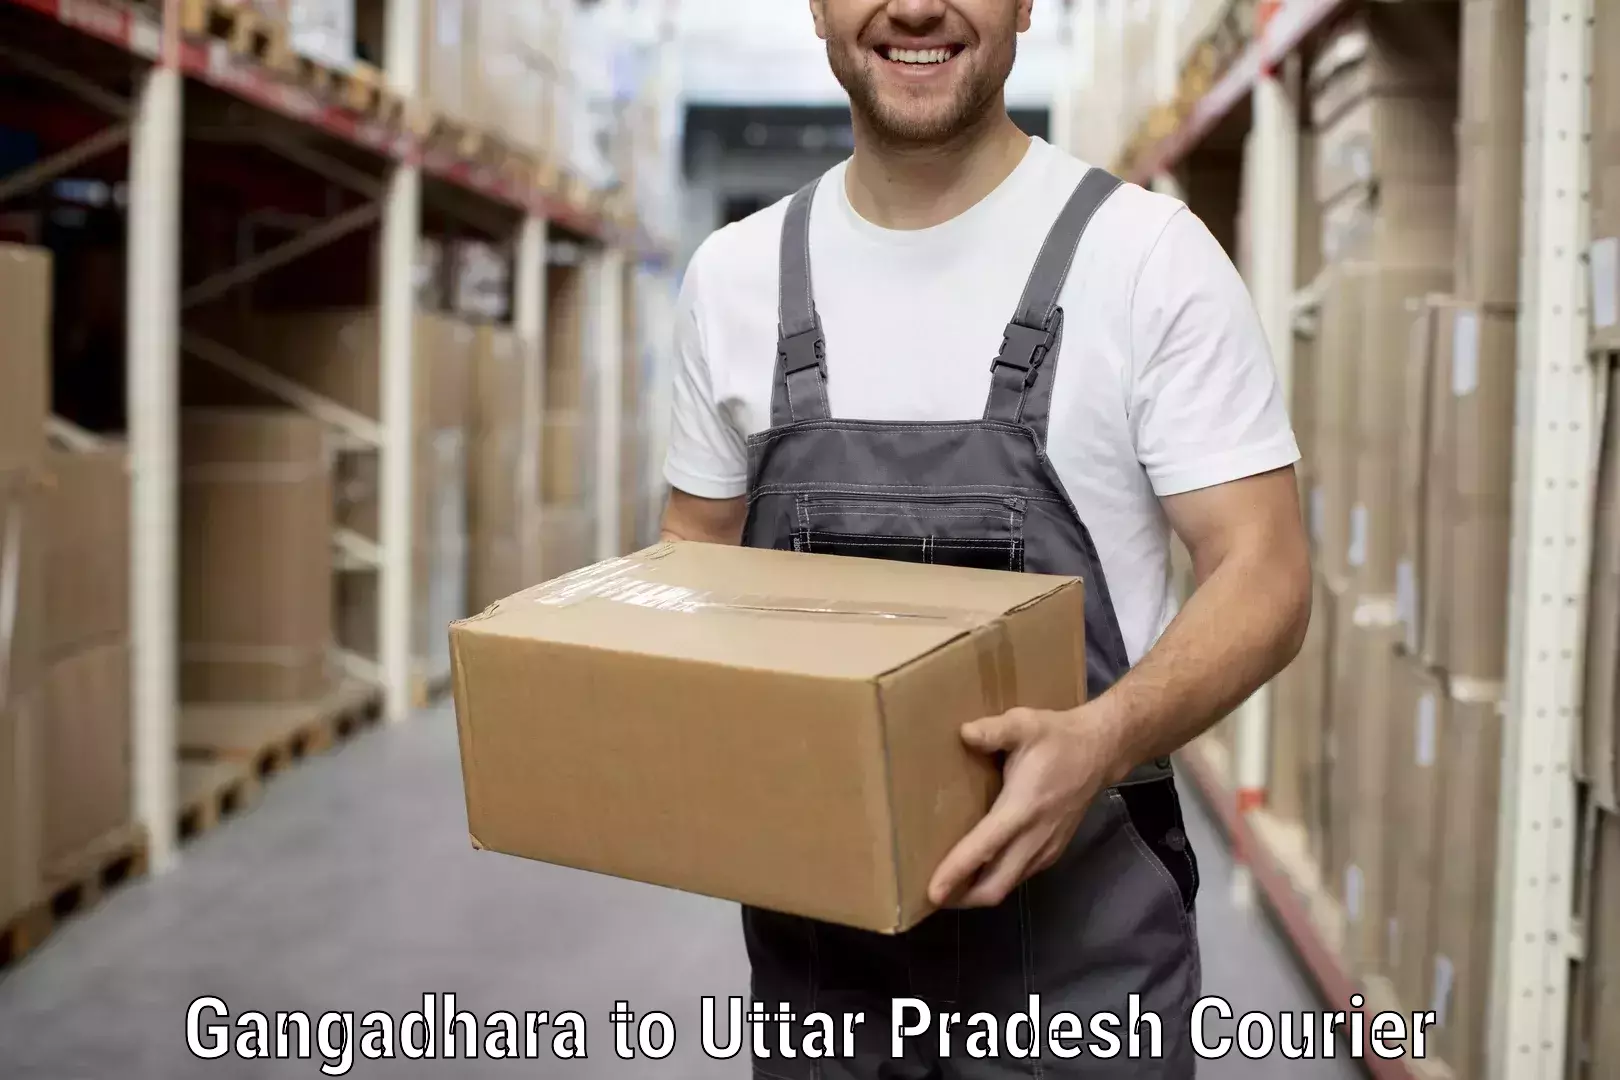 Reliable relocation services in Gangadhara to Kannauj